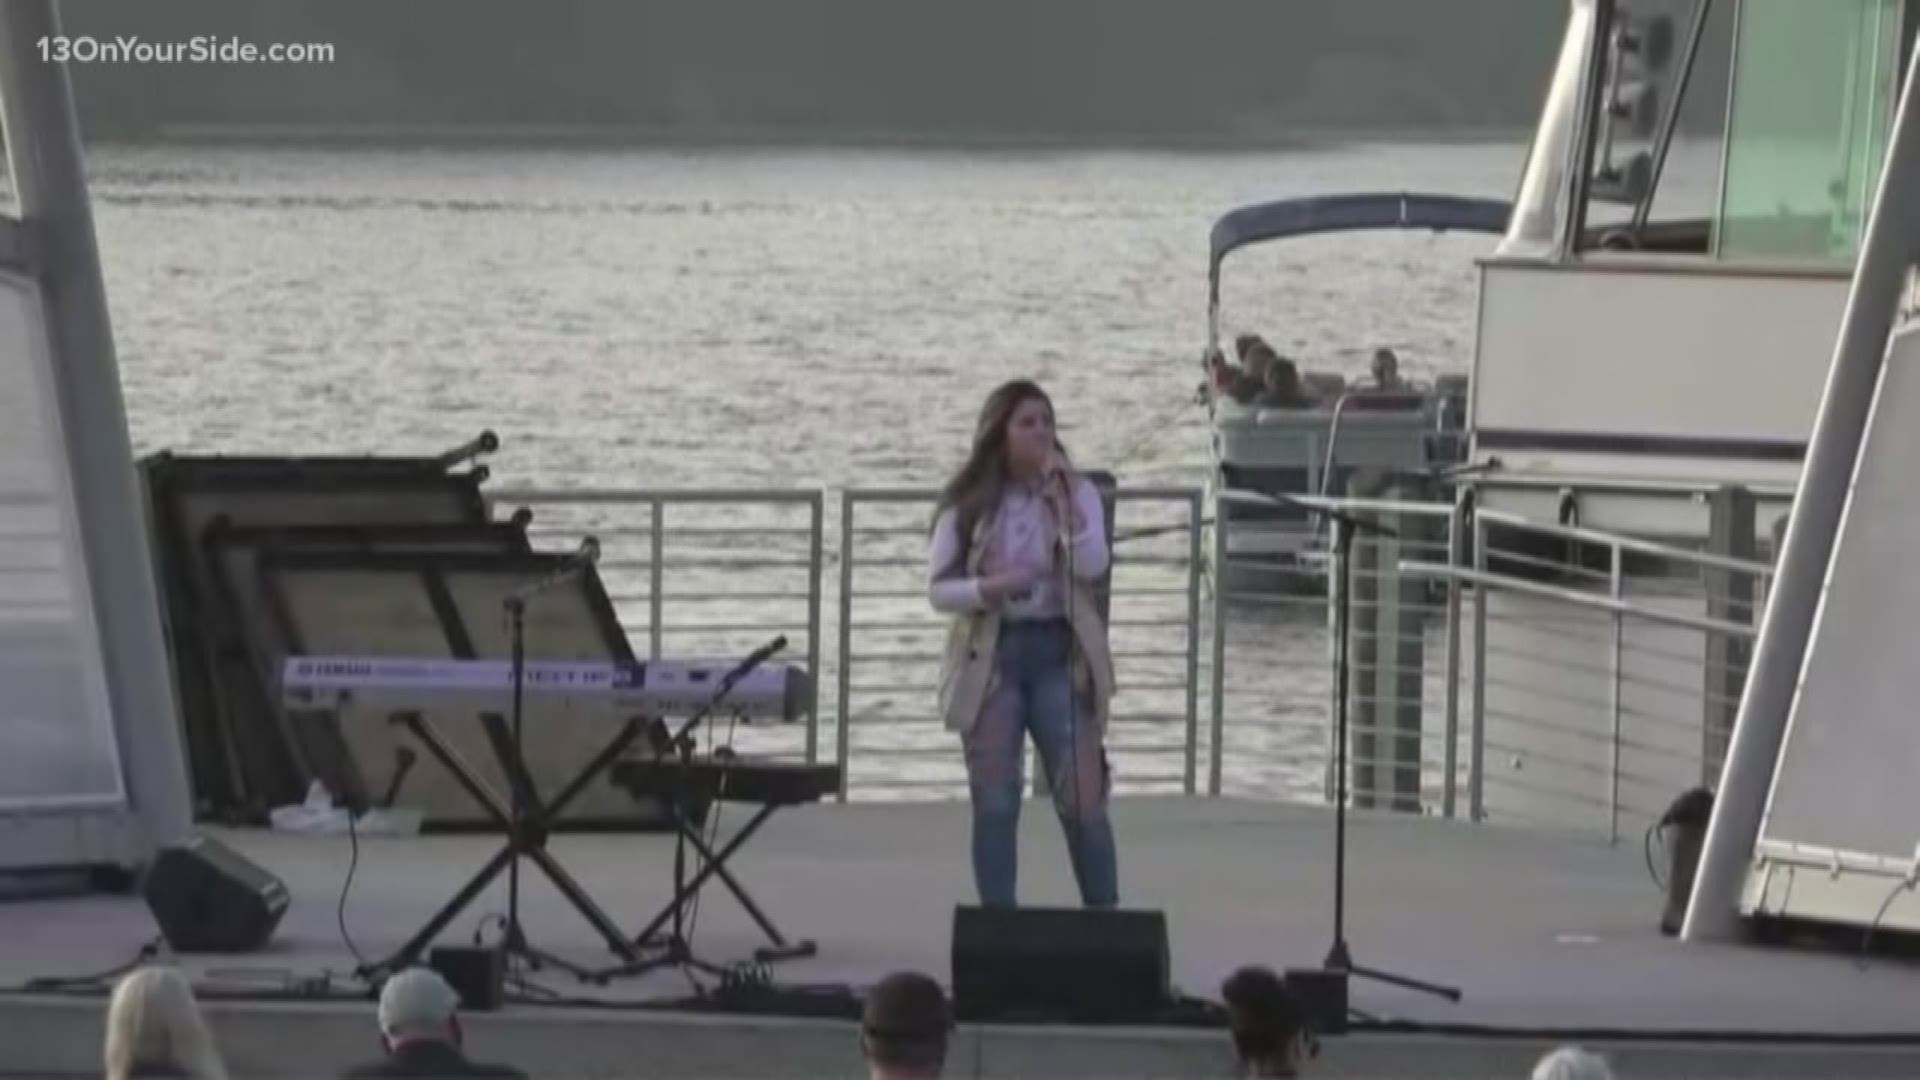 Grand Rapids singer wins Festival Idol competition